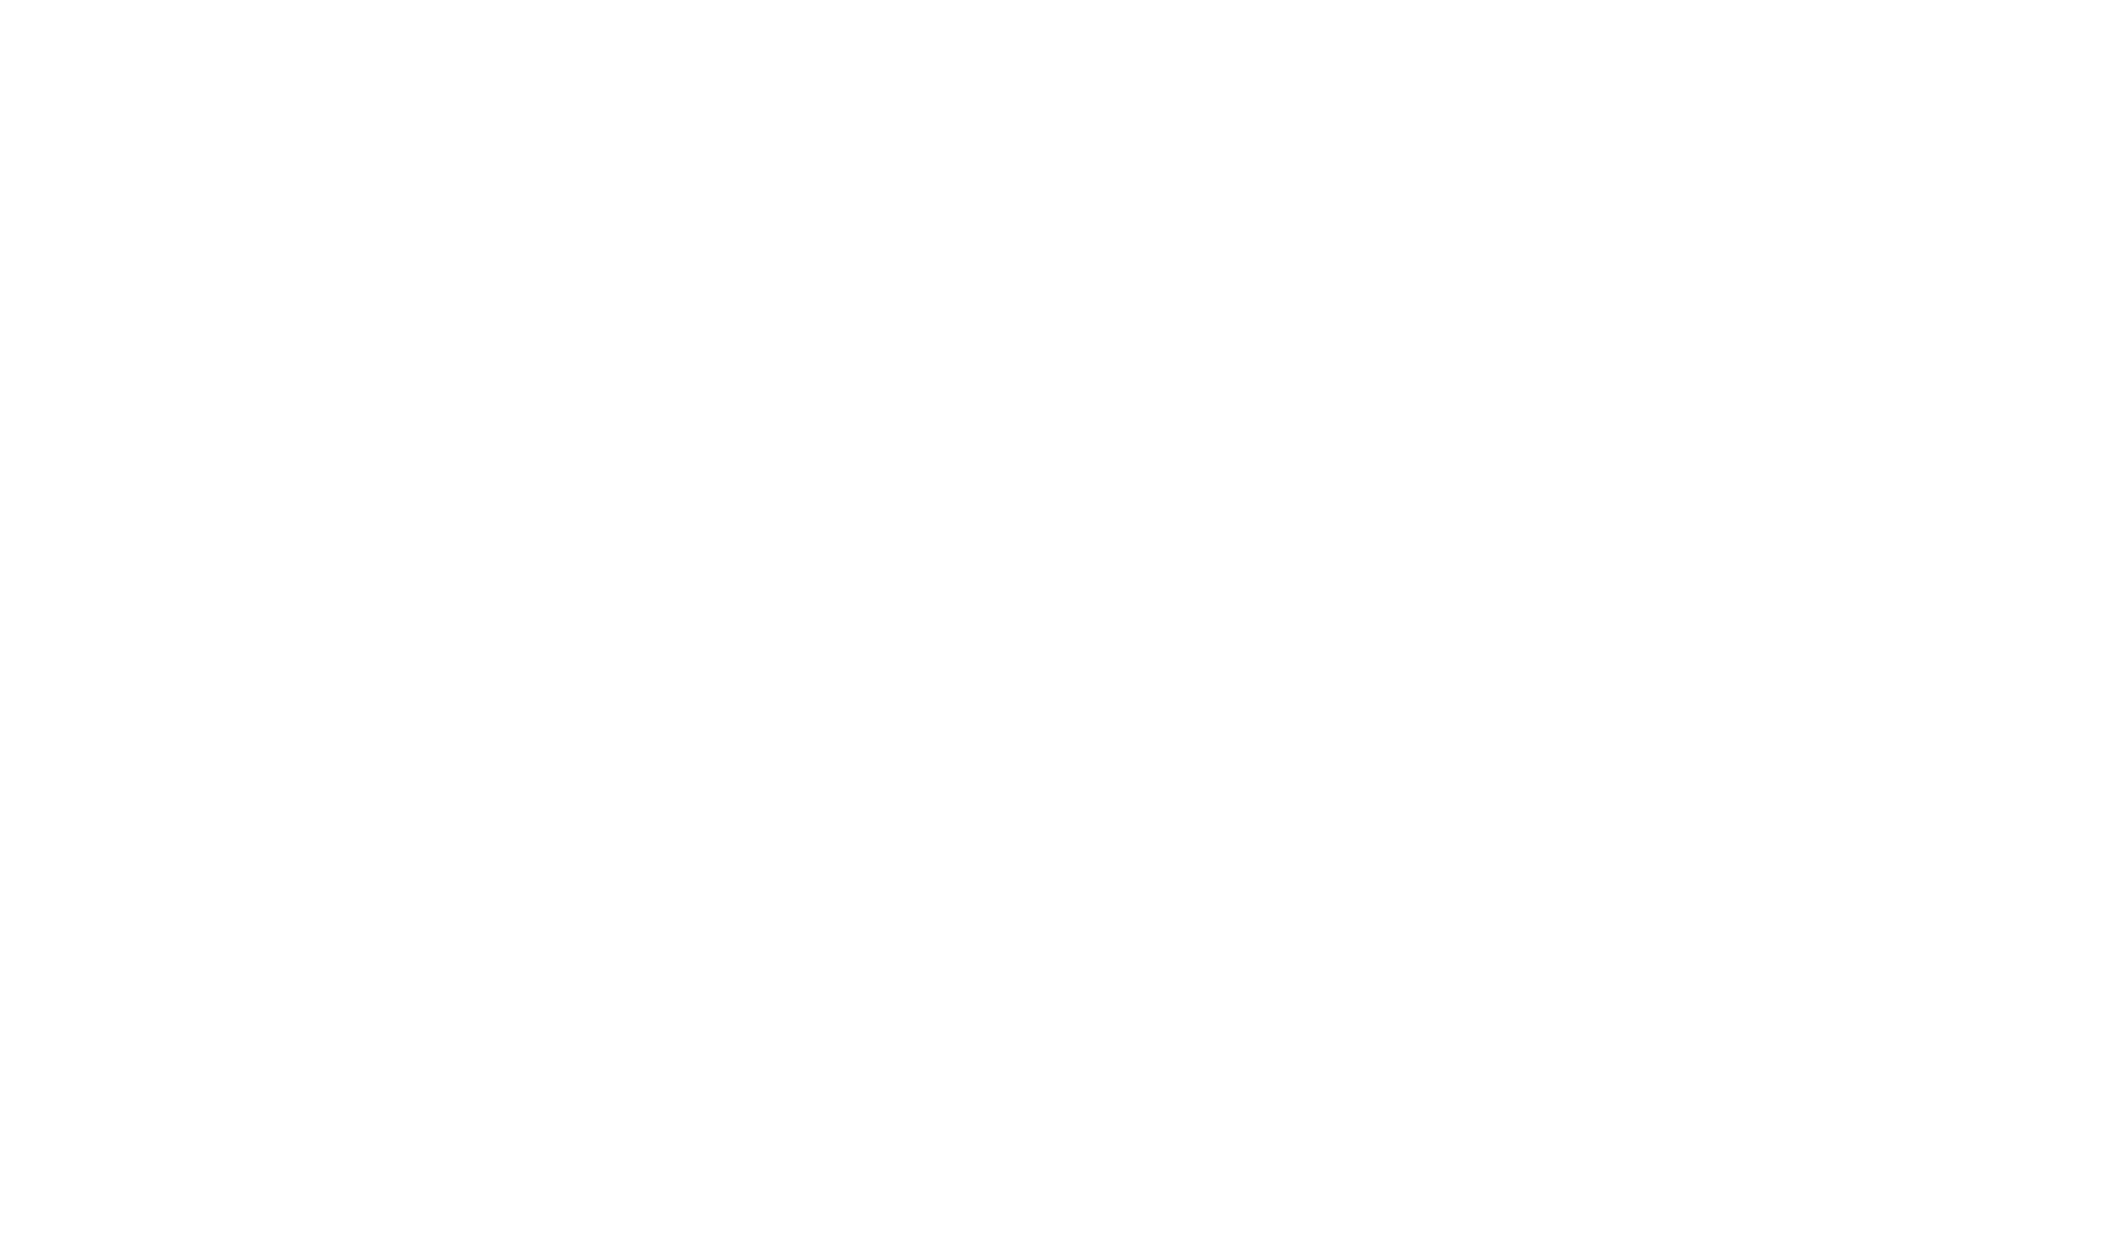 Prostate Cancer Research logo in white